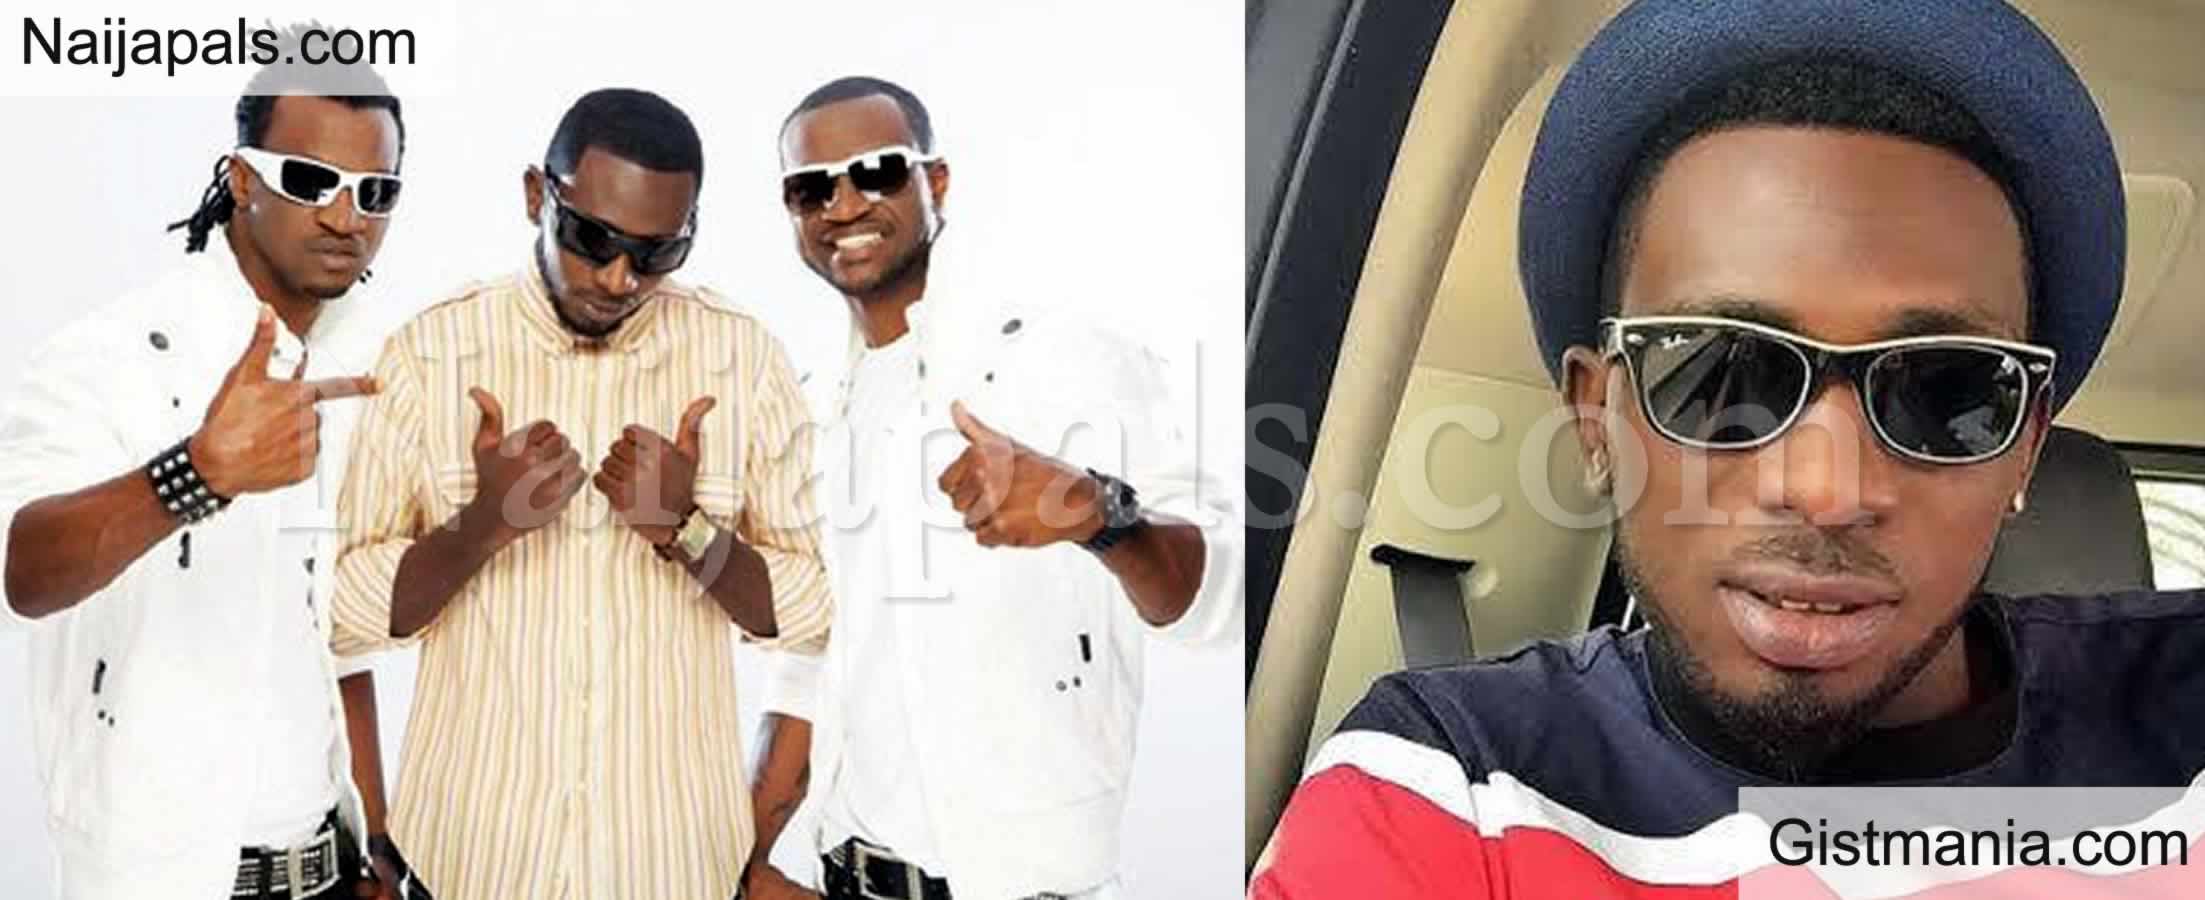 <img alt='.' class='lazyload' data-src='https://img.gistmania.com/emot/video.gif' /> <b>"PSquare & Jude Okoye Never Pay Me For Show I Performed" -Singer, MayD Reveals In Video</b>